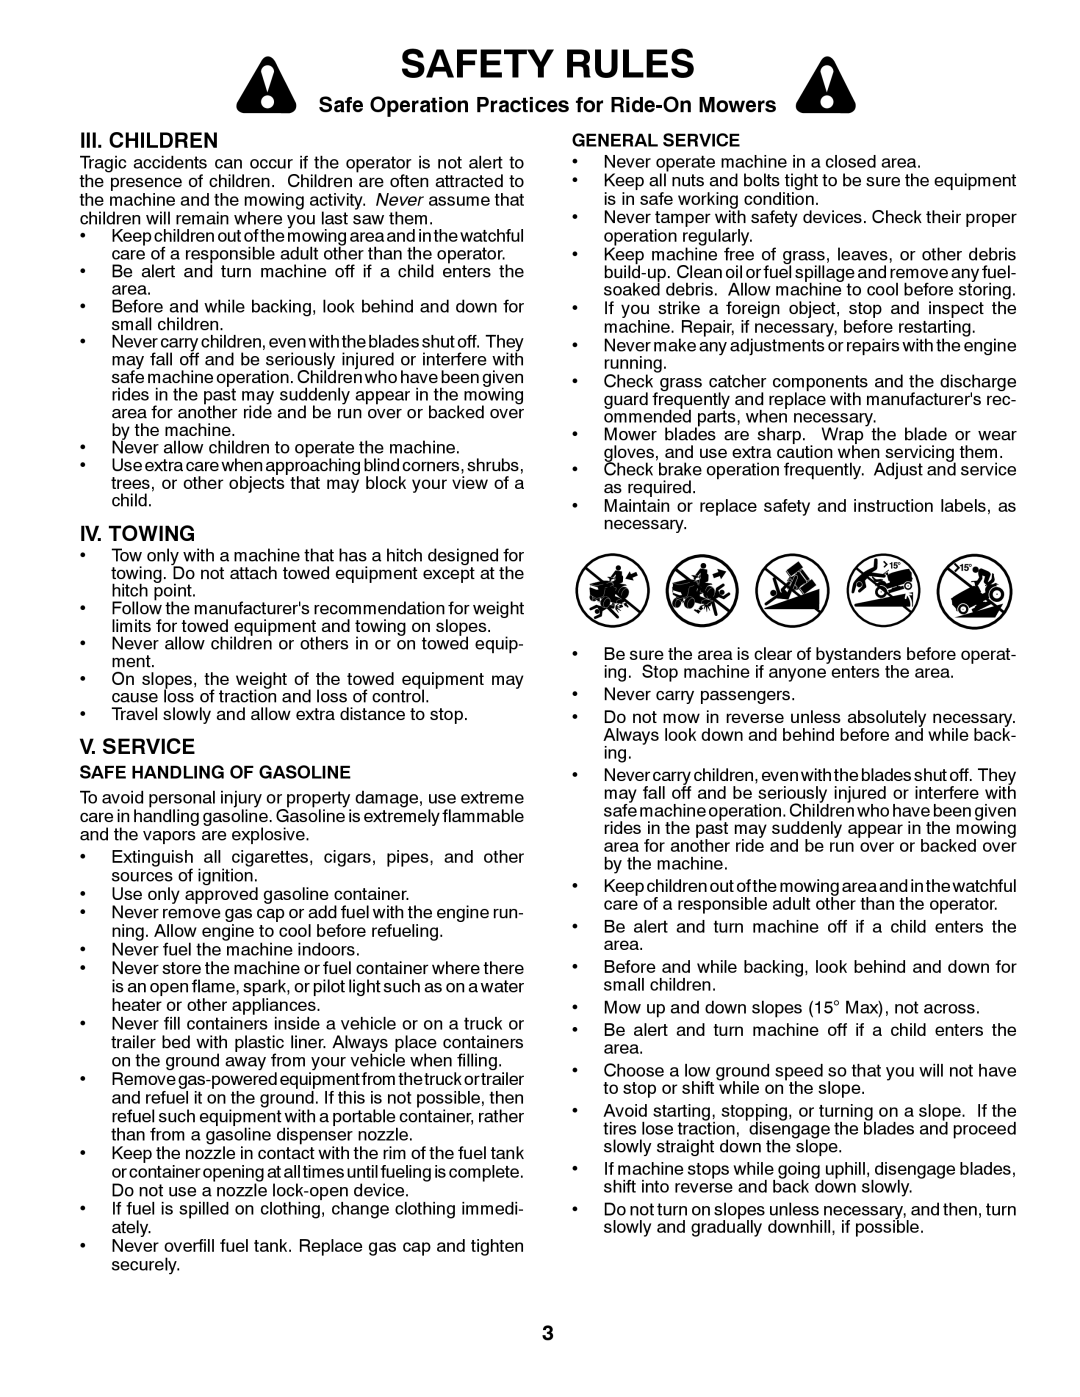 Jonsered LT2218A manual Iii. Children, Iv. Towing, V. Service, Safety Rules, Safe Operation Practices for Ride-On Mowers 